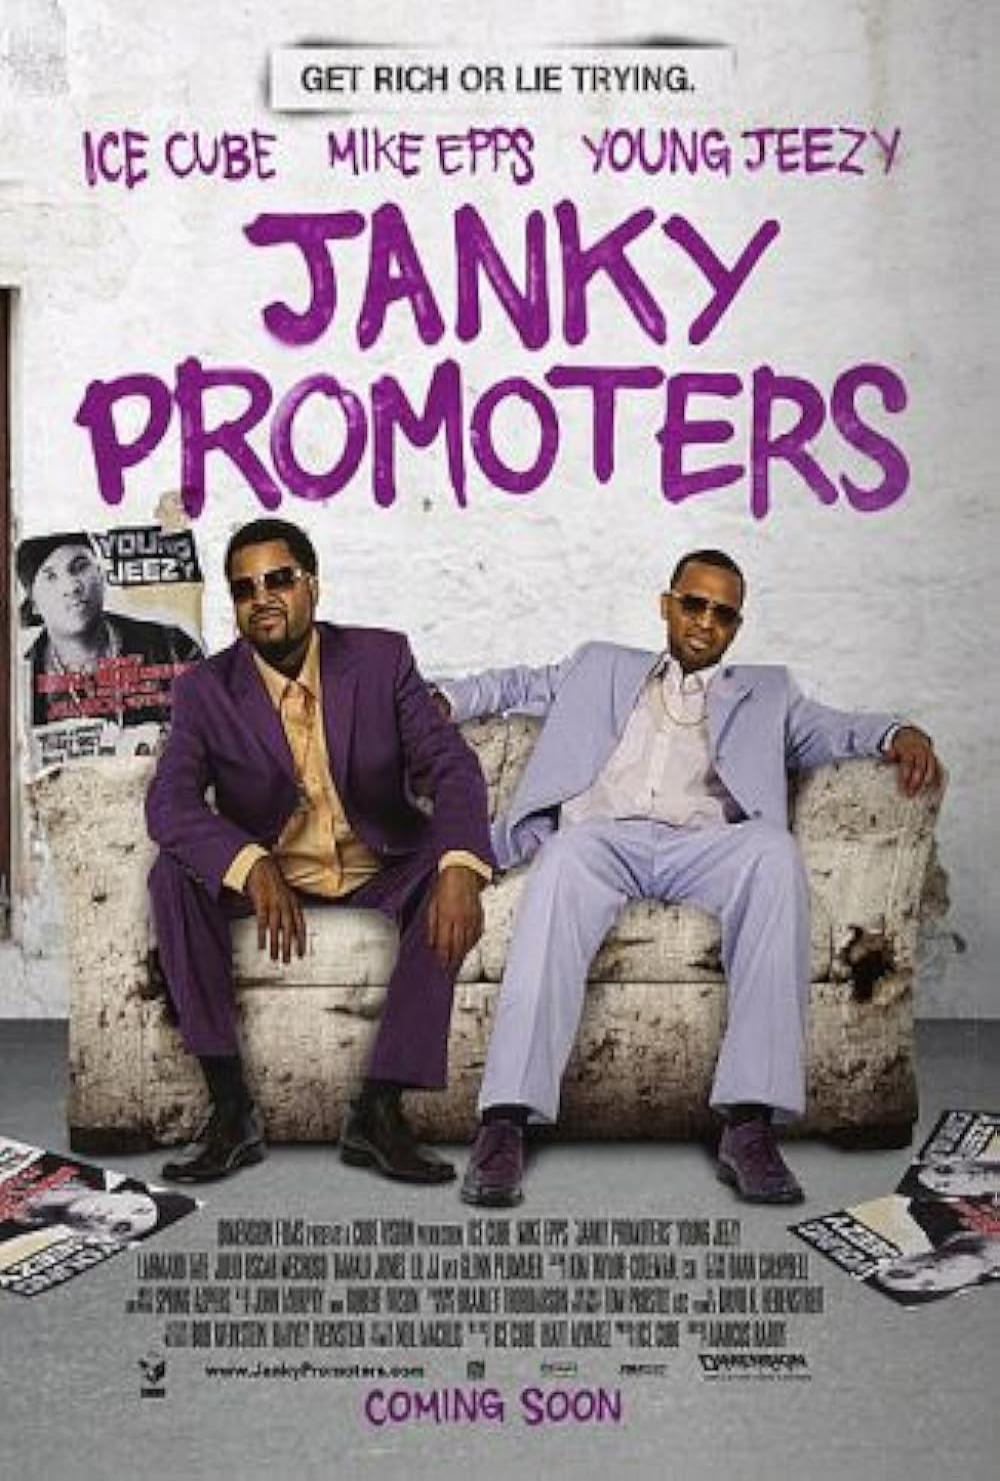 The Juncky Promoters